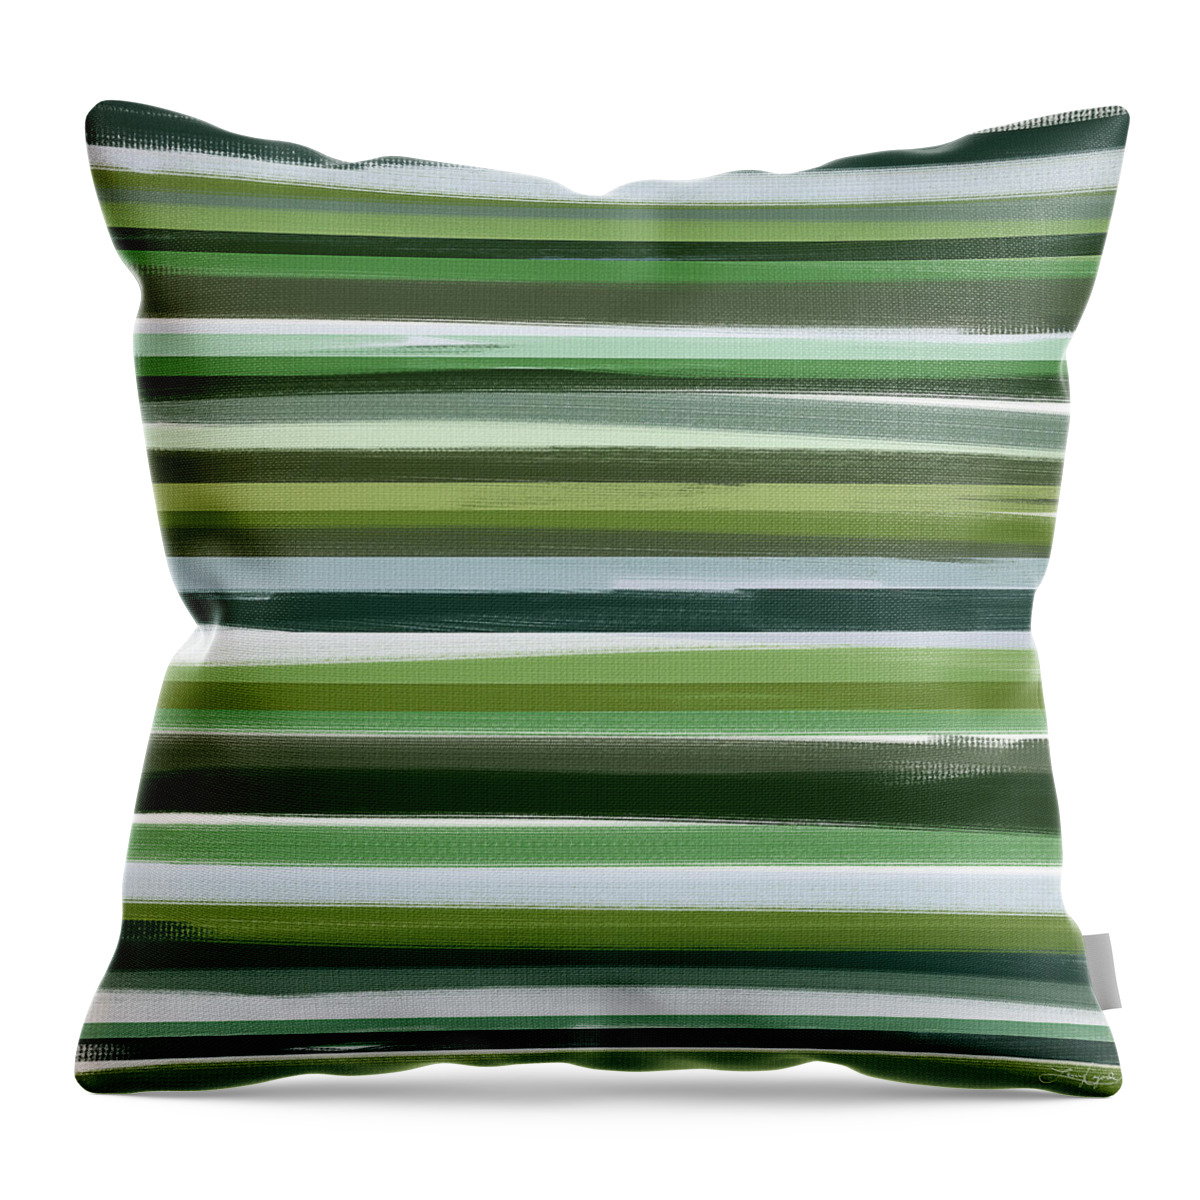 Green Throw Pillow featuring the painting Summer Of Green by Lourry Legarde